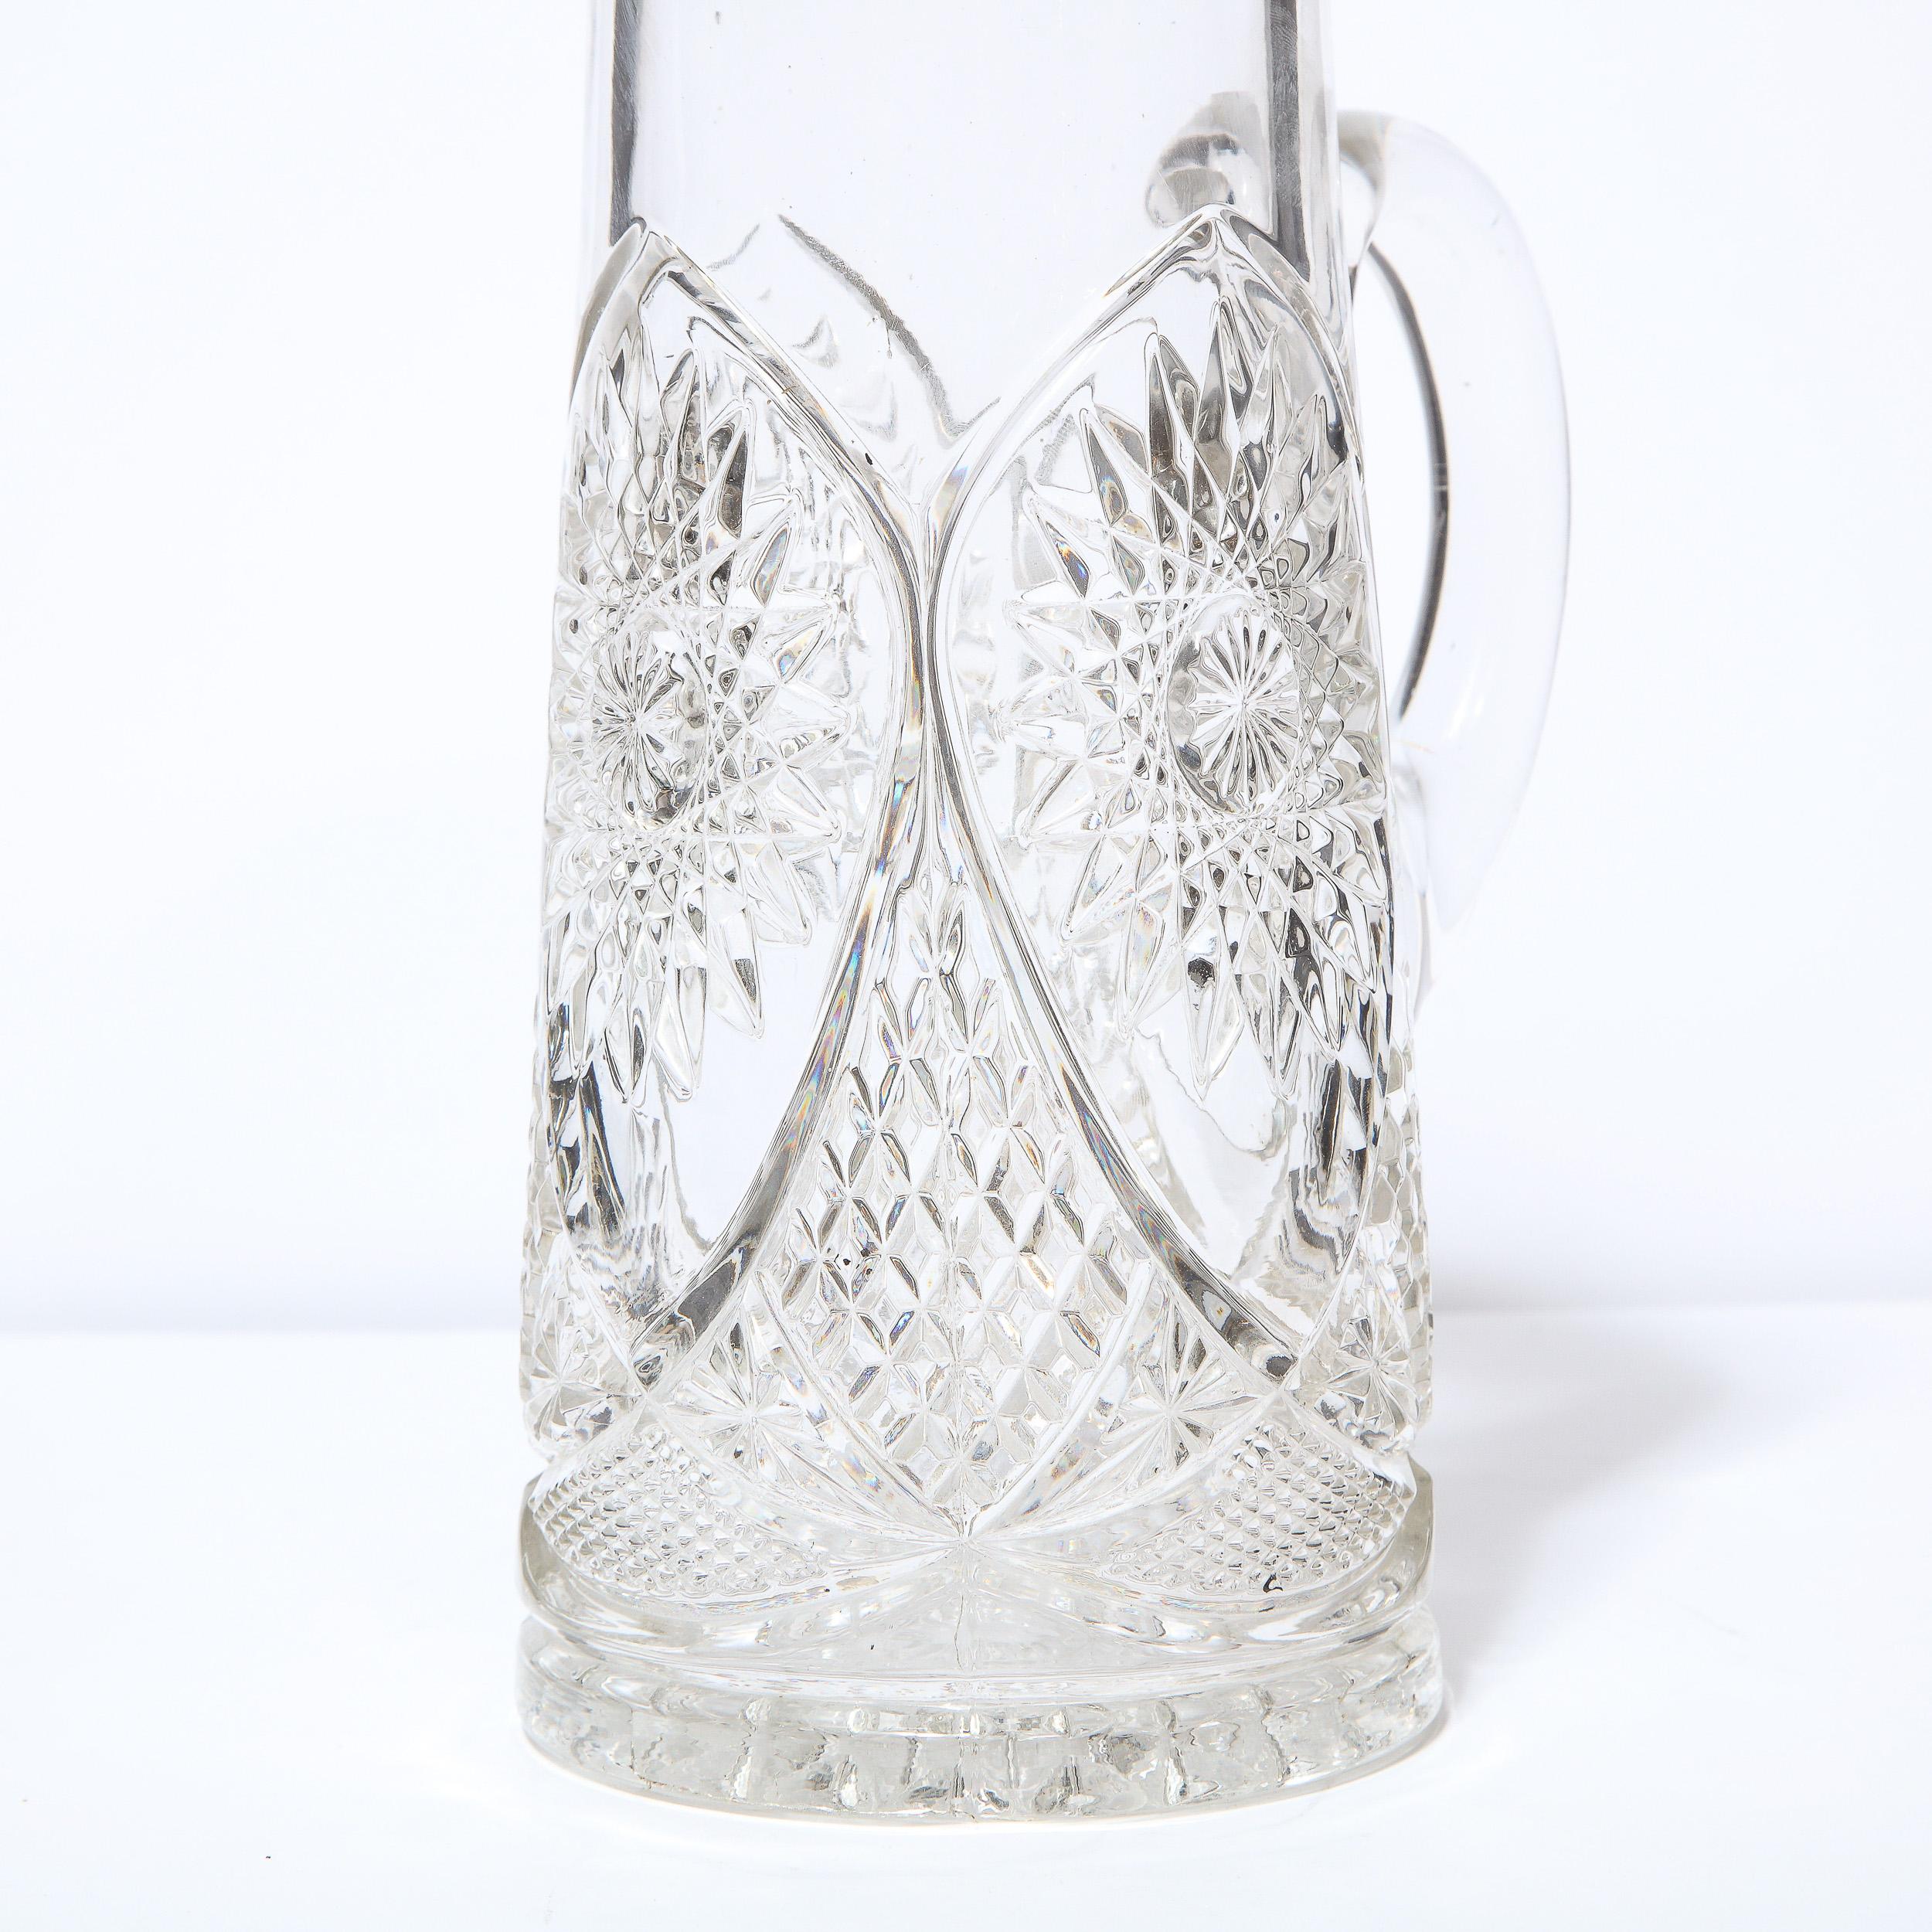 Mid-20th Century 1940s Art Deco Pressed Glass Pitcher with Geometric Details & Silver Plated Top